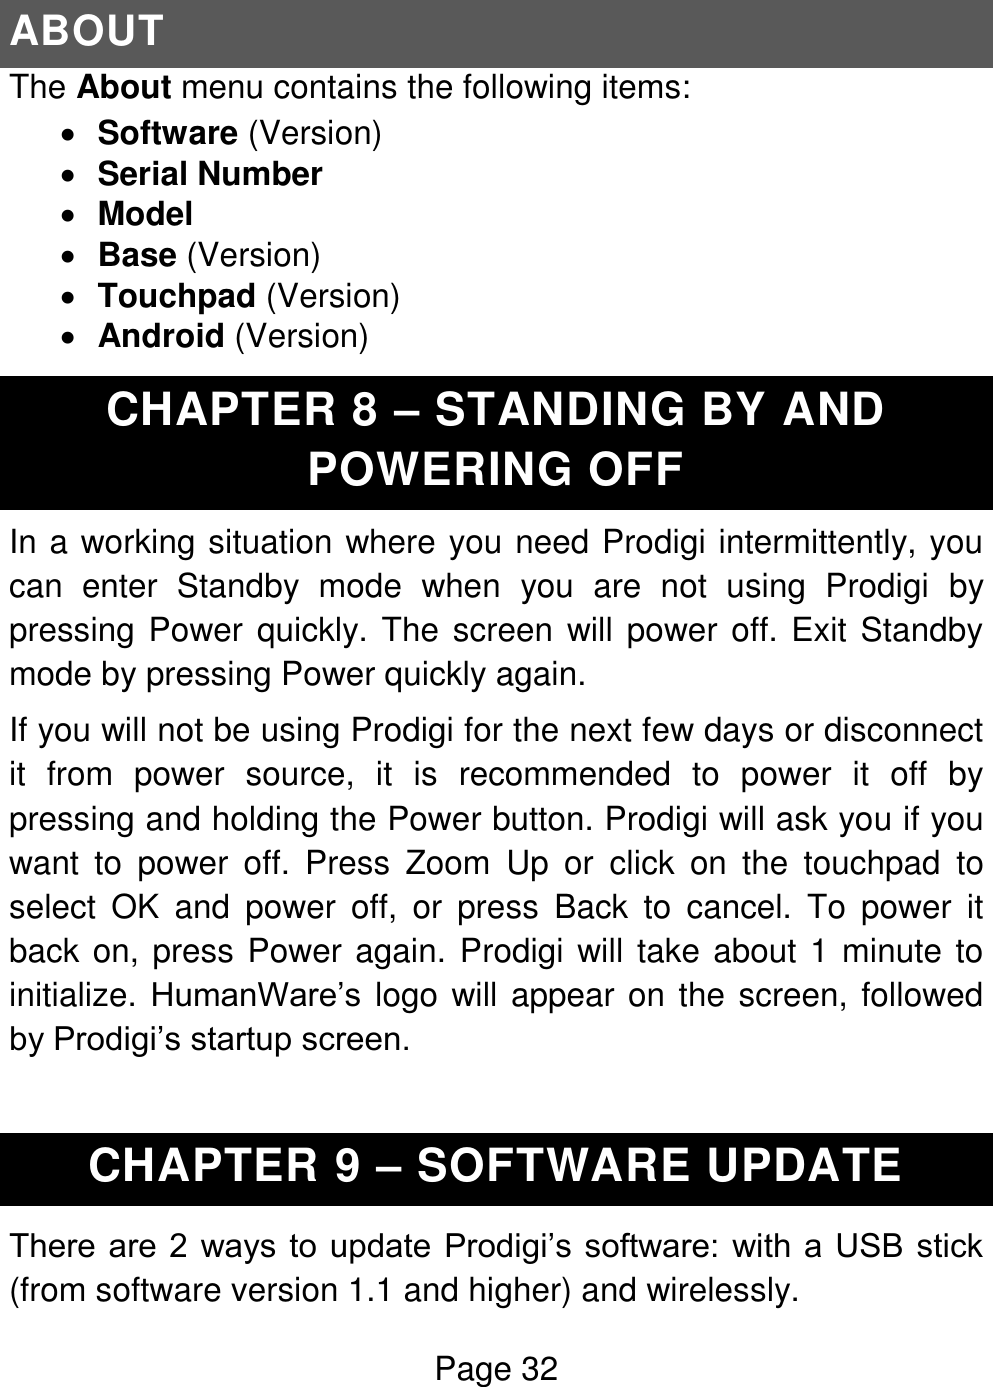 Page 32  ABOUT The About menu contains the following items:  Software (Version)  Serial Number  Model  Base (Version)  Touchpad (Version)  Android (Version) CHAPTER 8 – STANDING BY AND POWERING OFF In a working situation where you need Prodigi intermittently, you can  enter  Standby  mode  when  you  are  not  using  Prodigi  by pressing Power quickly. The screen will power off. Exit Standby mode by pressing Power quickly again. If you will not be using Prodigi for the next few days or disconnect it  from  power  source,  it  is  recommended  to  power  it  off  by pressing and holding the Power button. Prodigi will ask you if you want  to  power  off.  Press  Zoom  Up  or  click  on  the  touchpad  to select  OK  and  power  off,  or  press  Back  to  cancel.  To  power  it back on, press Power again. Prodigi will take about 1 minute to initialize. HumanWare’s  logo will appear on the screen, followed by Prodigi’s startup screen.  CHAPTER 9 – SOFTWARE UPDATE There are  2  ways to update Prodigi’s software: with a  USB stick (from software version 1.1 and higher) and wirelessly. 